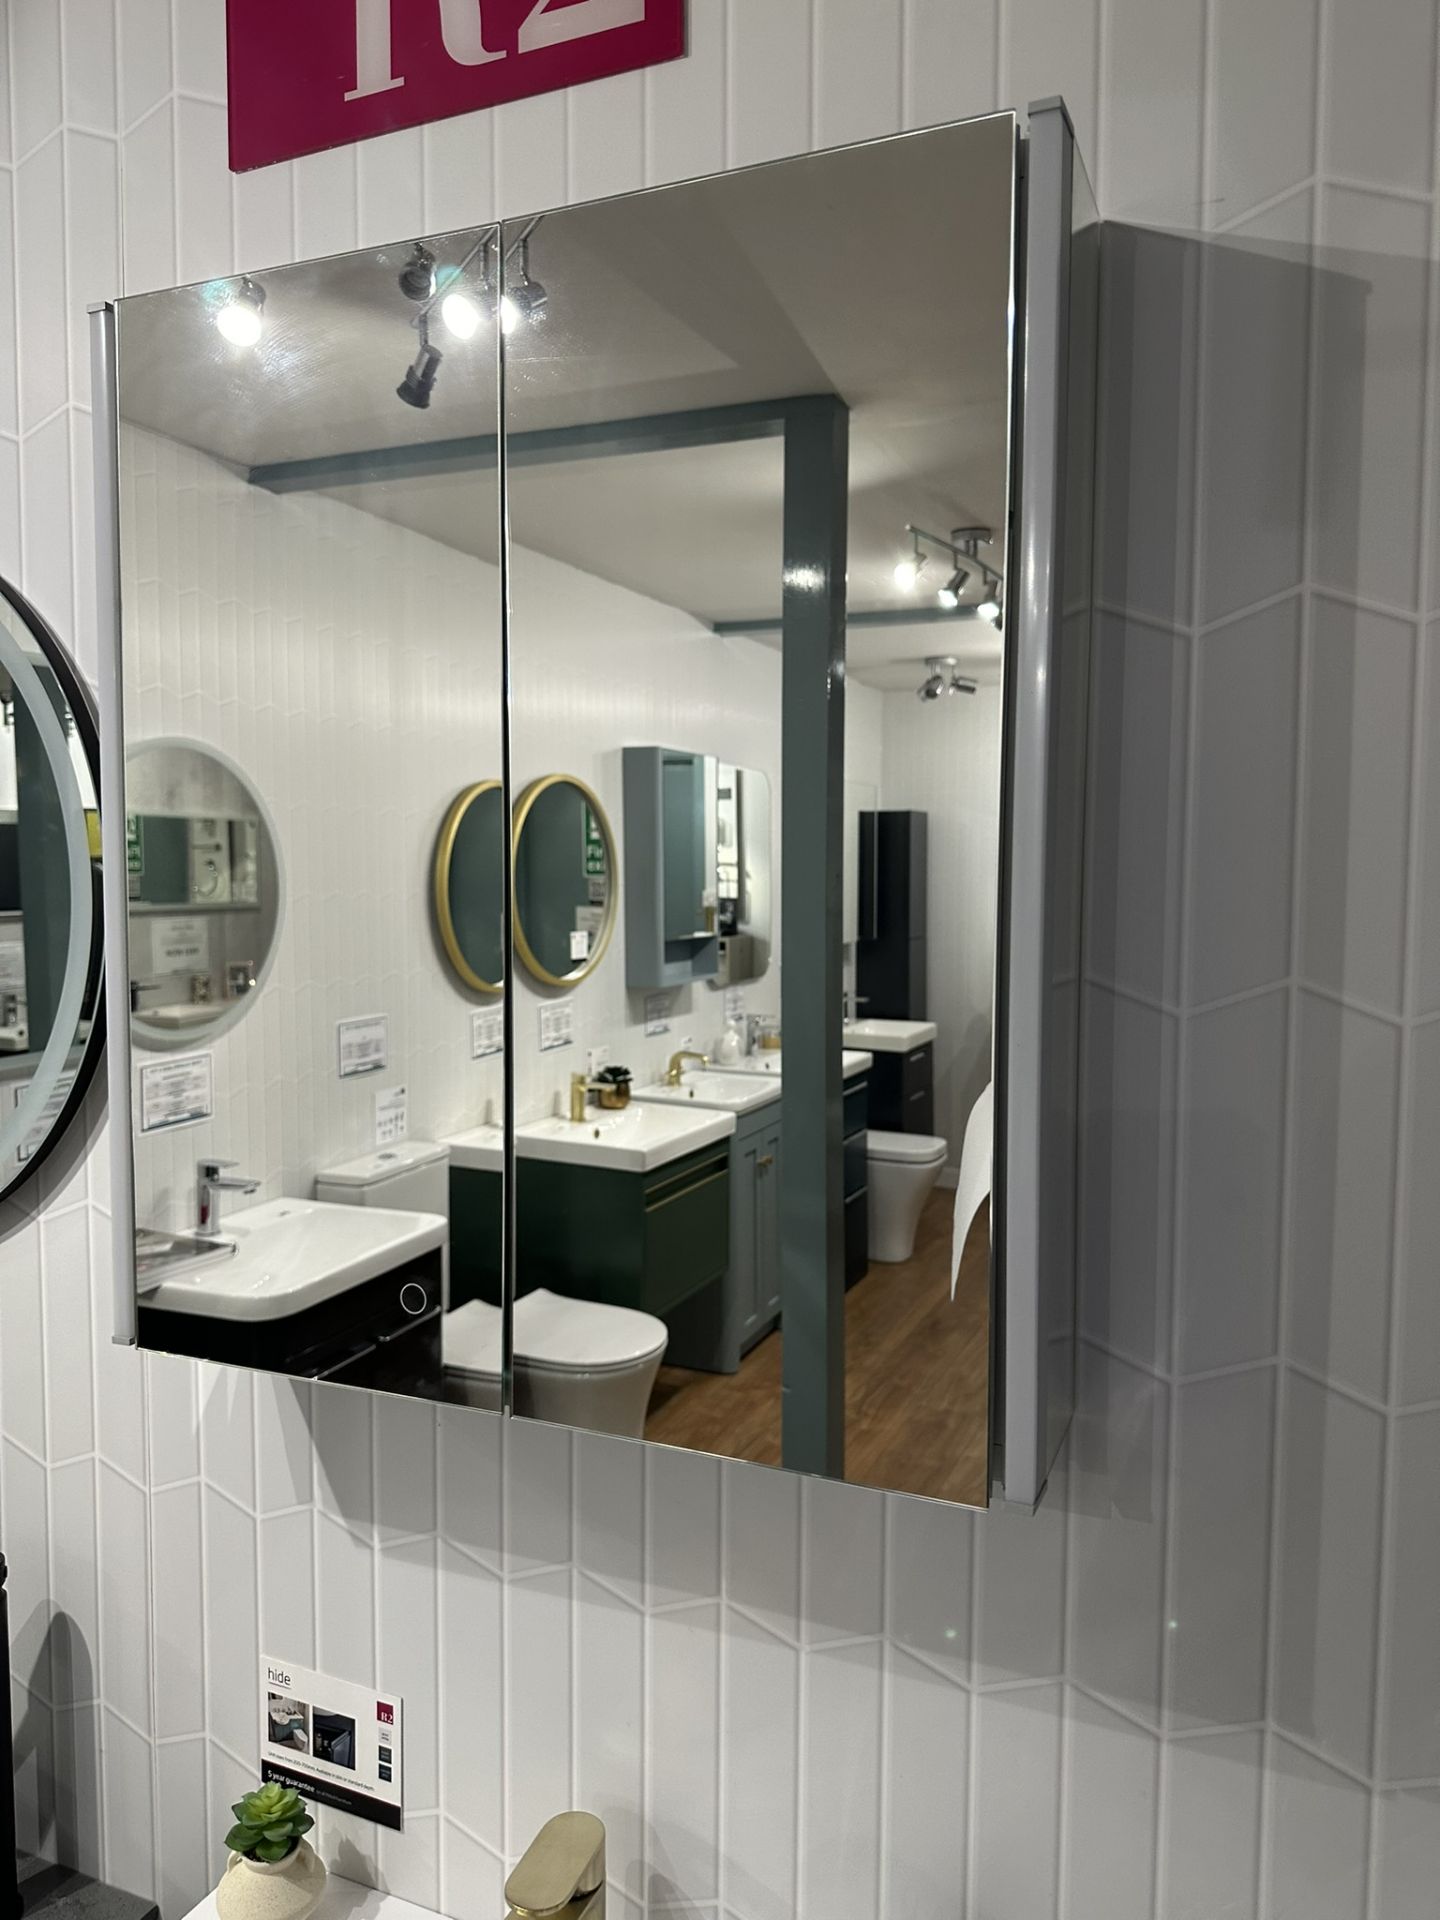 Ex-Display Vanity Set with Mirrored Cabinet - Image 3 of 4